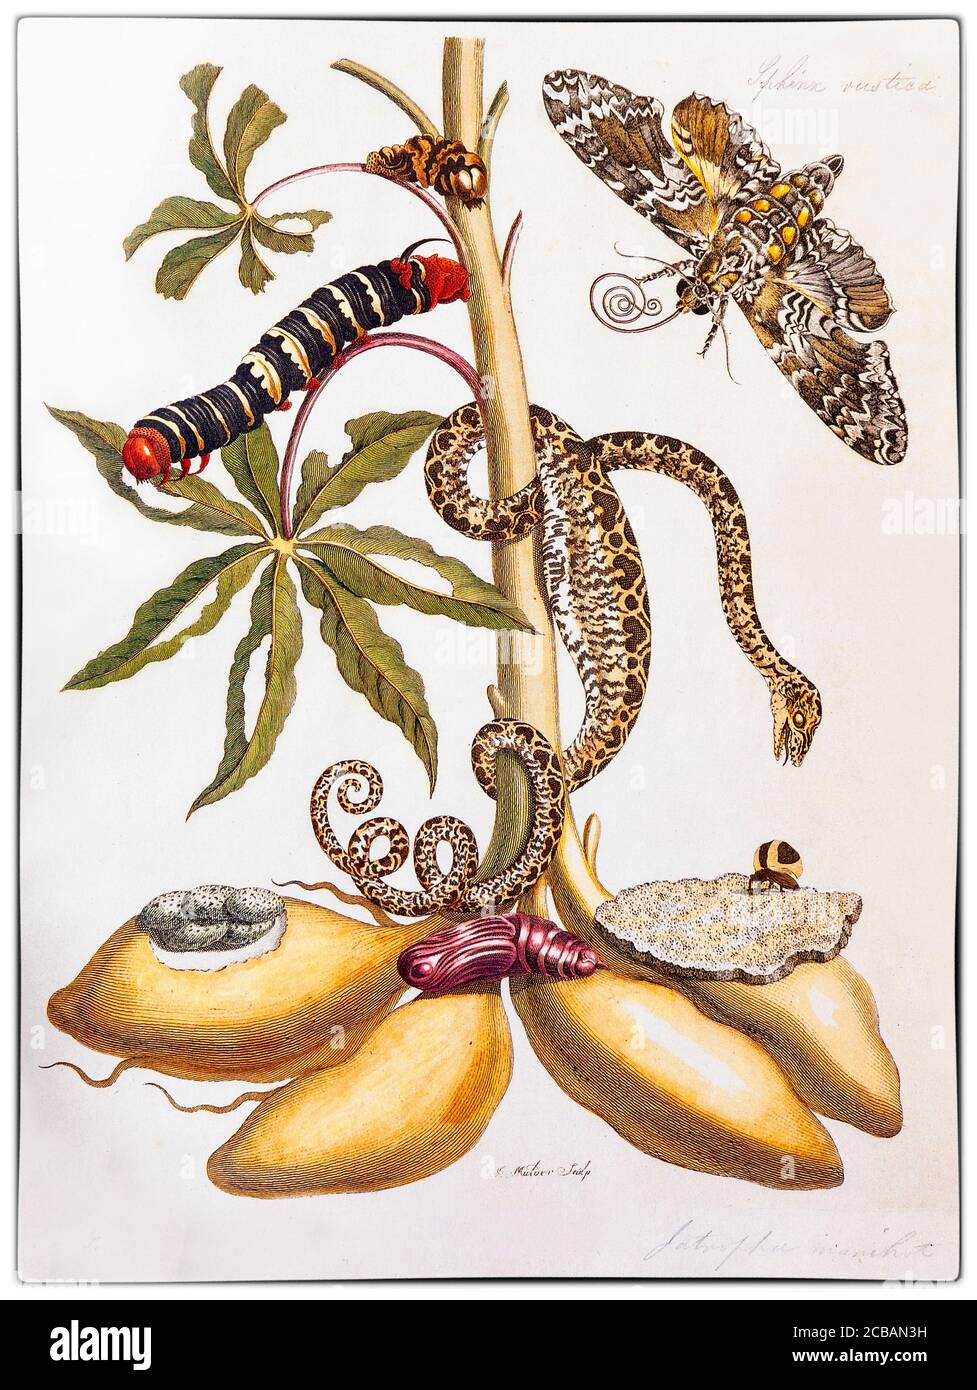 Maria Sibylla Merian (1647-1717) was a German-born naturalist and scientific illustrator, a descendant of the Frankfurt branch of the Swiss Merian family. Merian was one of the first European naturalists to observe insects directly. The illustration shows Manihot esculenta, commonly called cassava, a woody shrub native to South America of the spurge family, Euphorbiaceae with a Snake and Moth Metamorphosis from the artist's 'Metamorphosis Insectorum Surinamensium' Stock Photo